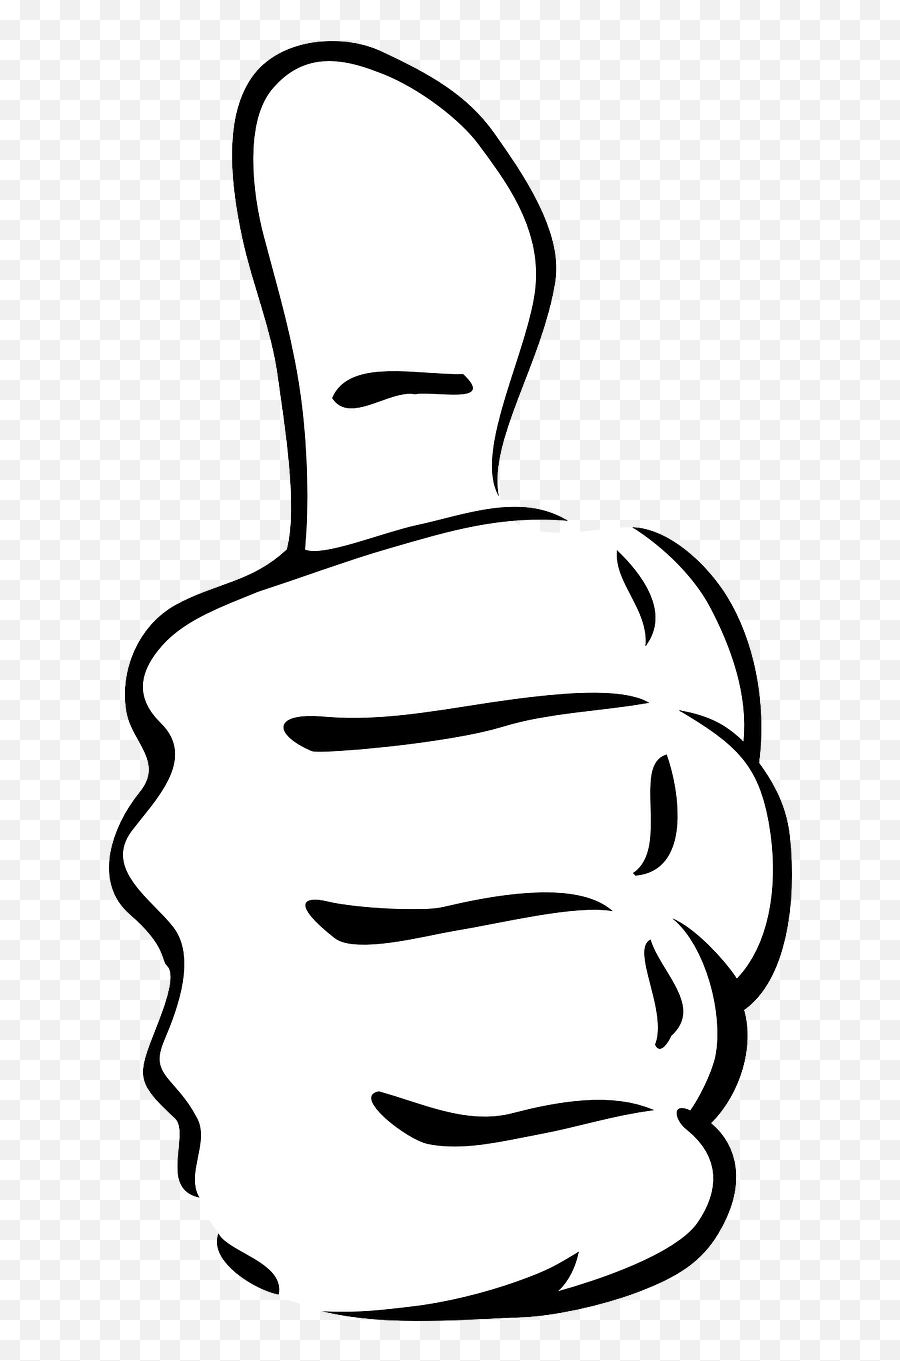 Thumb Up Success Positive Png Picpng Emoji,Small Thumbs Up Emoticon